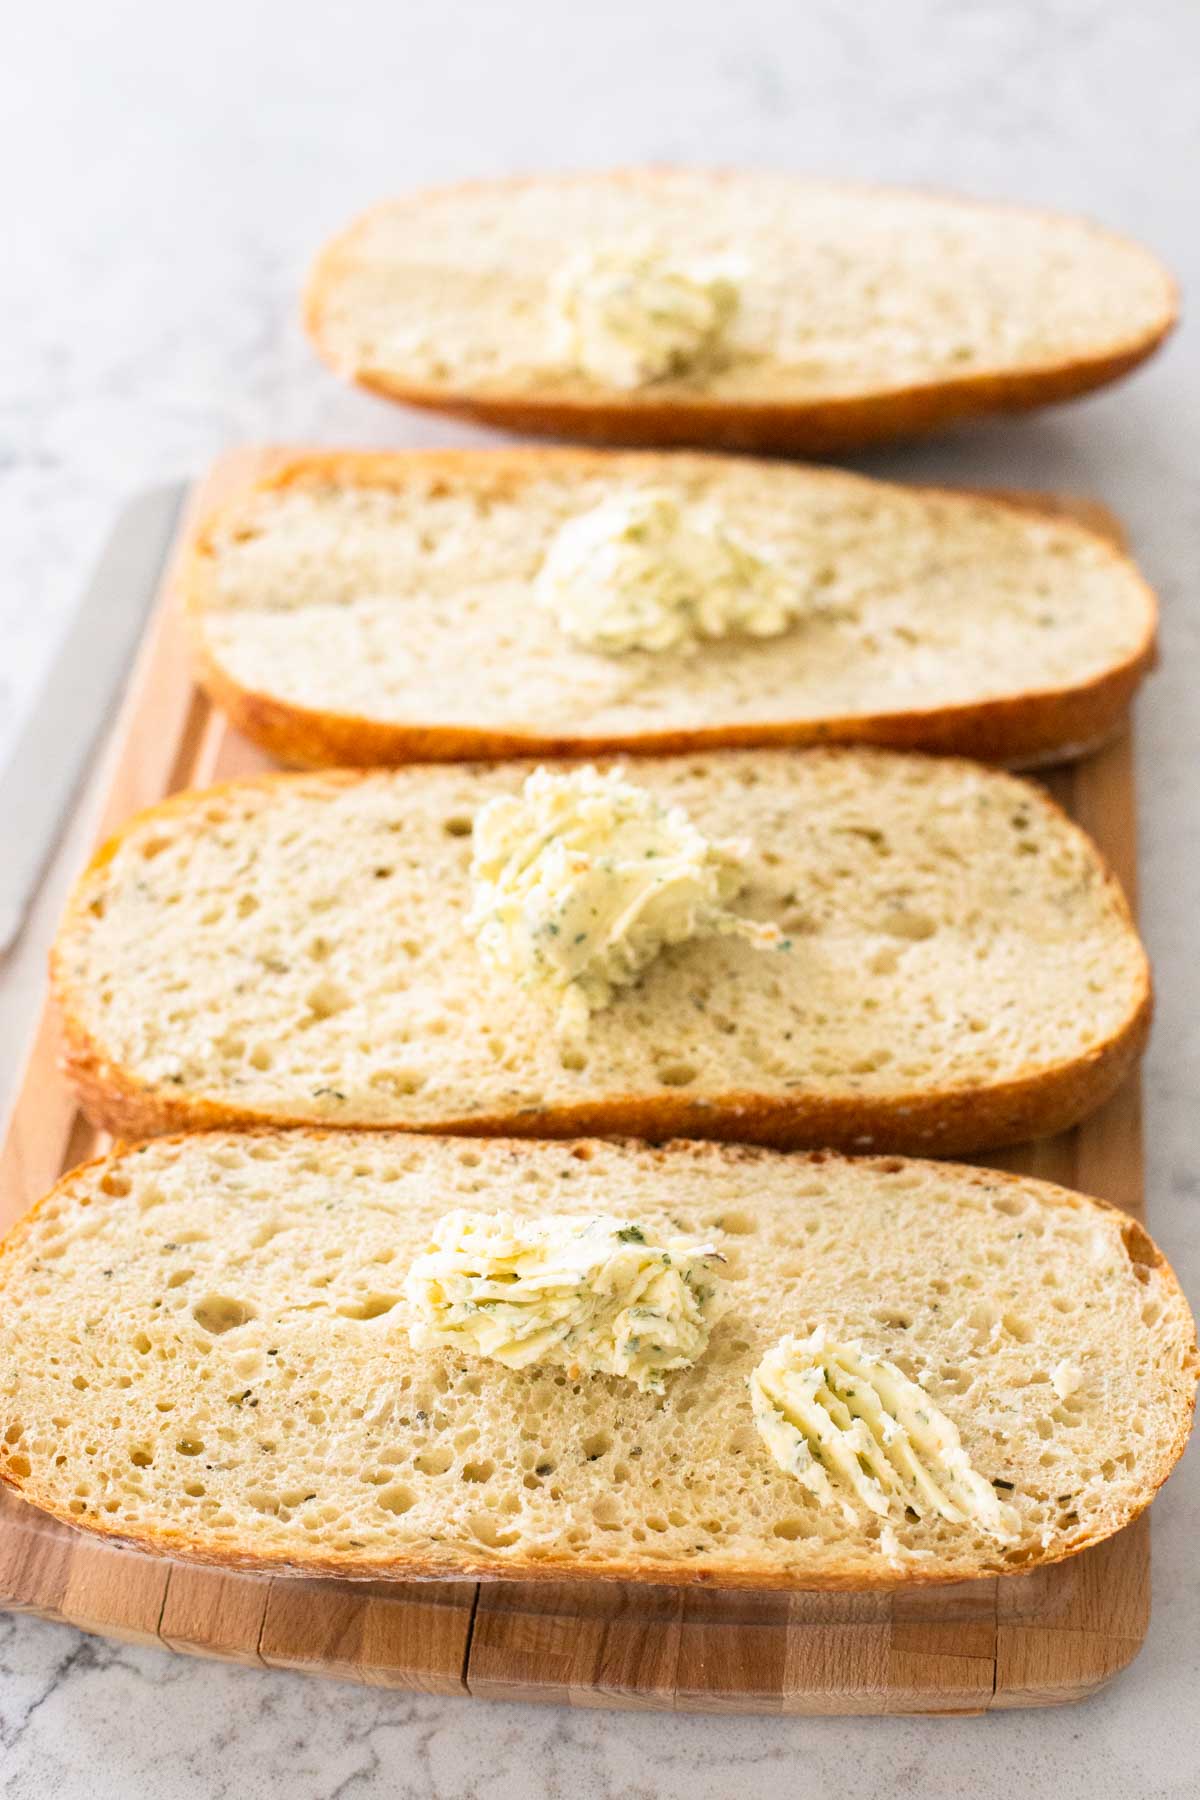 Dollops of garlic butter have been divided among halves of bread.